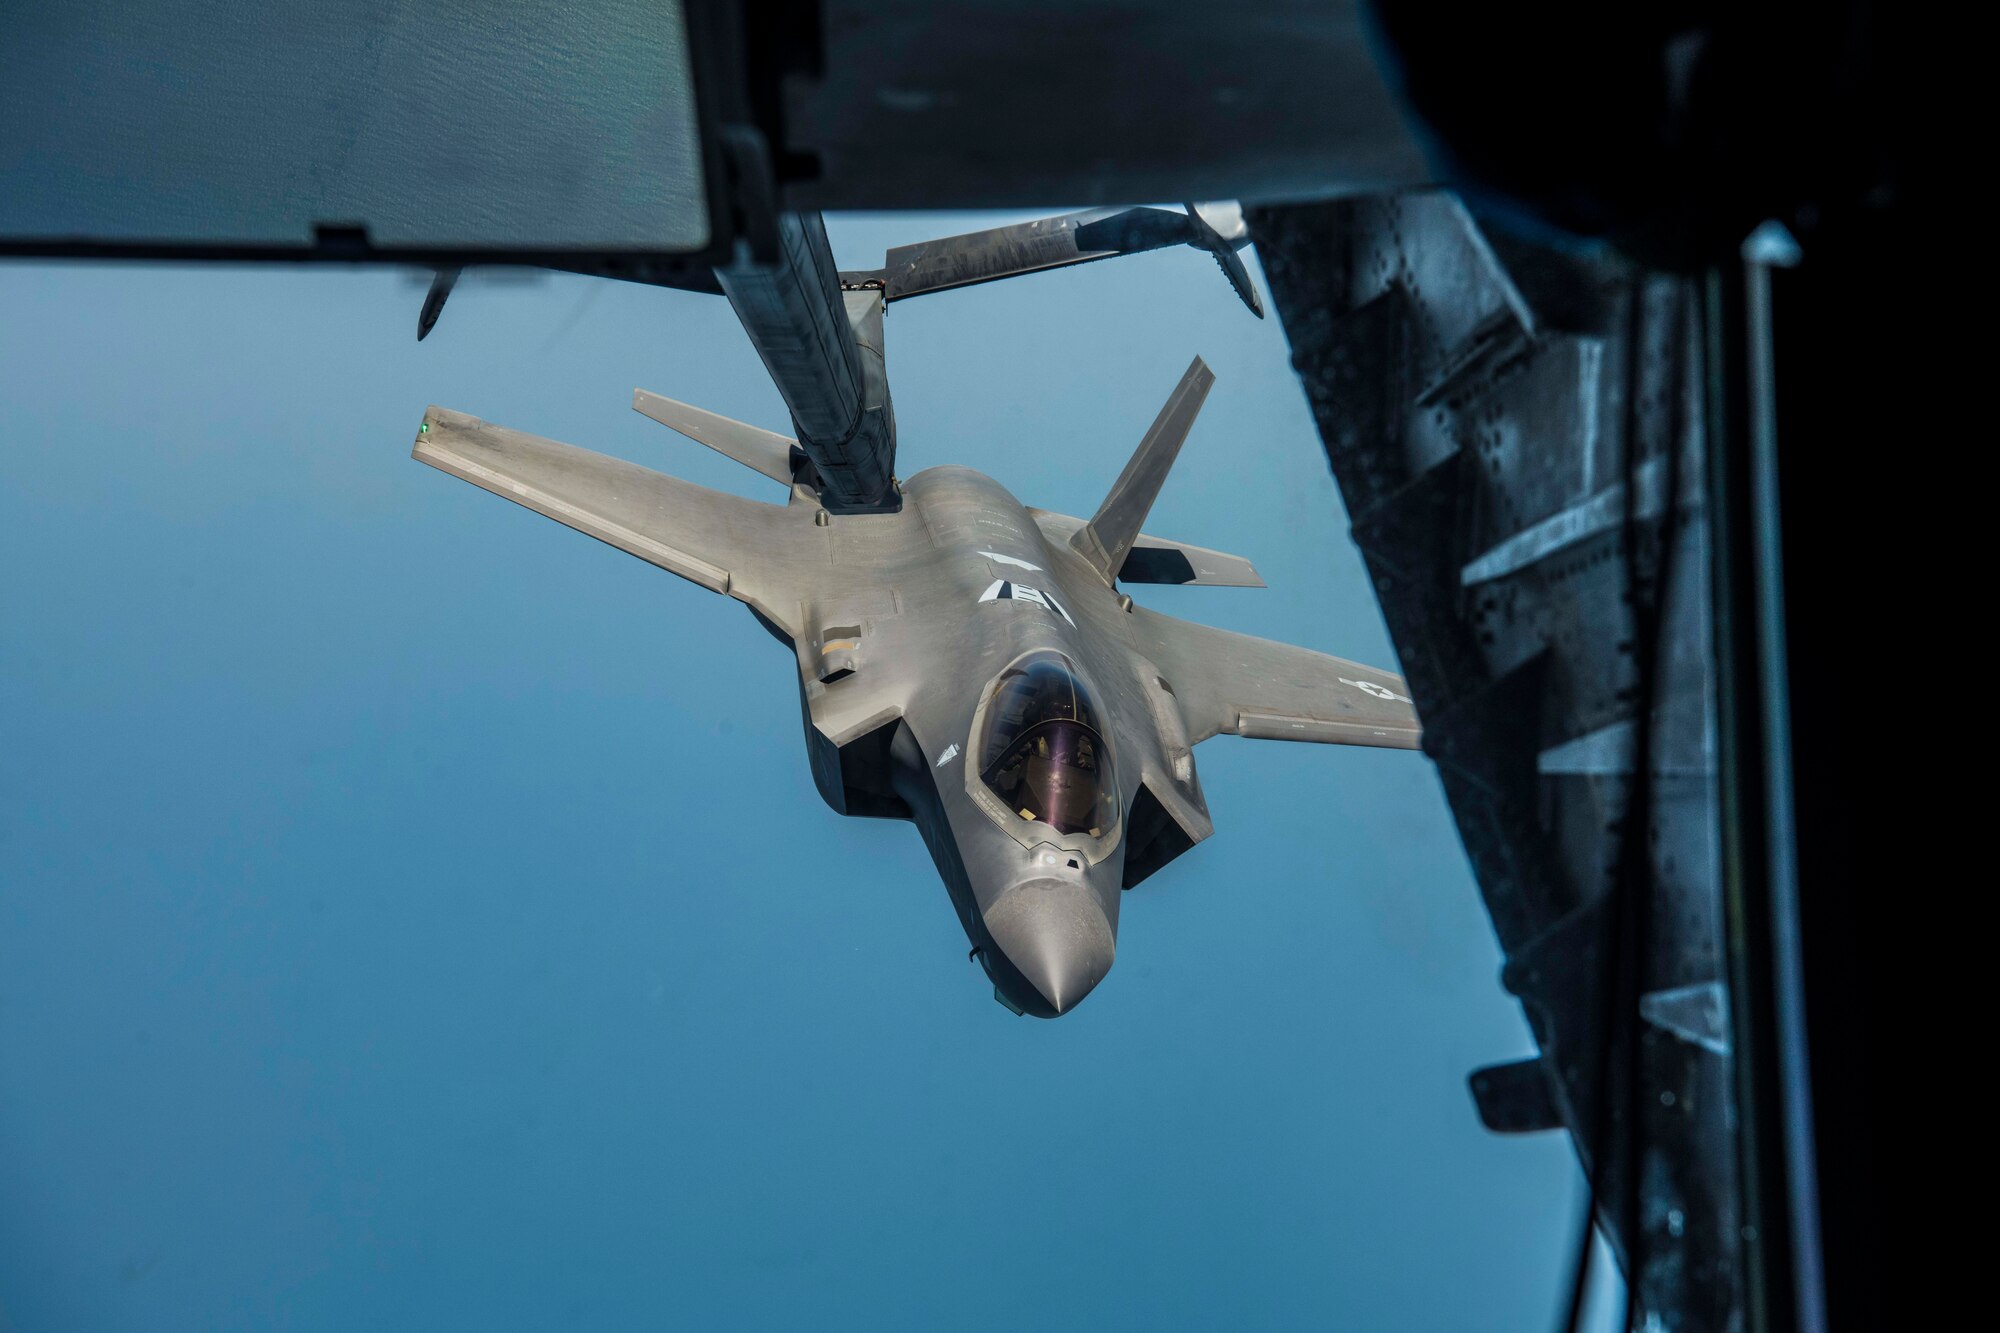 An F-35A Lightning II from the 421st Fighter Squadron here detaches from a 908th Expeditionary Refueling Squadron KC-10 Extender after refueling during “Enduring Lightning II” exercise with Israel forces over Israel Aug. 2, 2020. While forging a resolute partnership, the allies train to maintain a ready posture to deter against regional aggressors (U.S. Air Force photo by Master Sgt. Patrick OReilly)